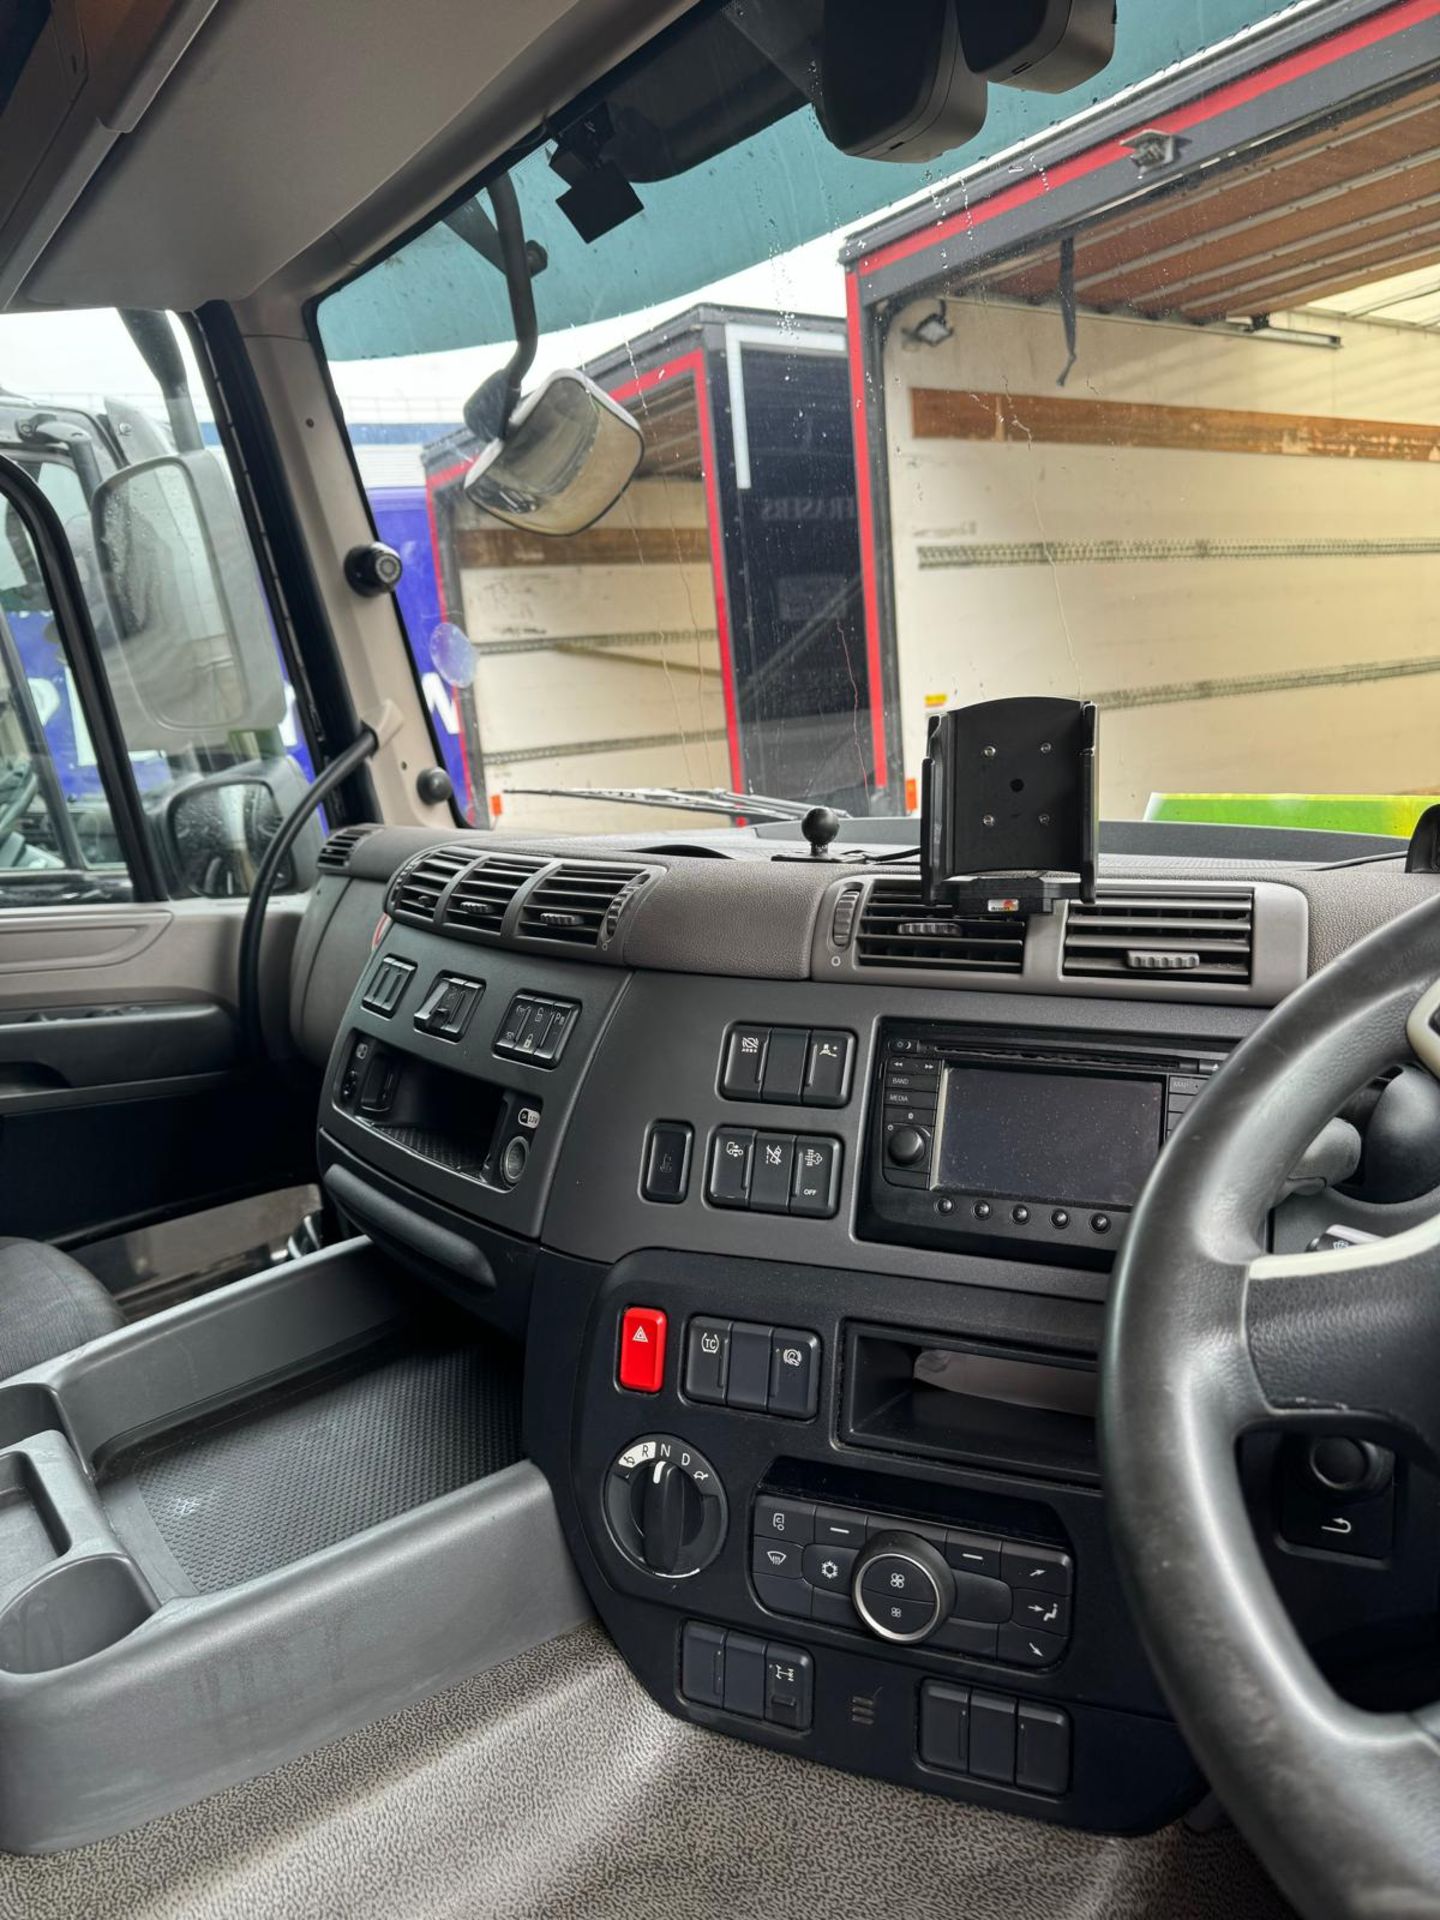 2019, DAF CF 260 FA (Ex-Fleet Owned & Maintained) - FN69 AXD (18 Ton Rigid Truck with Tail Lift) - Image 16 of 20